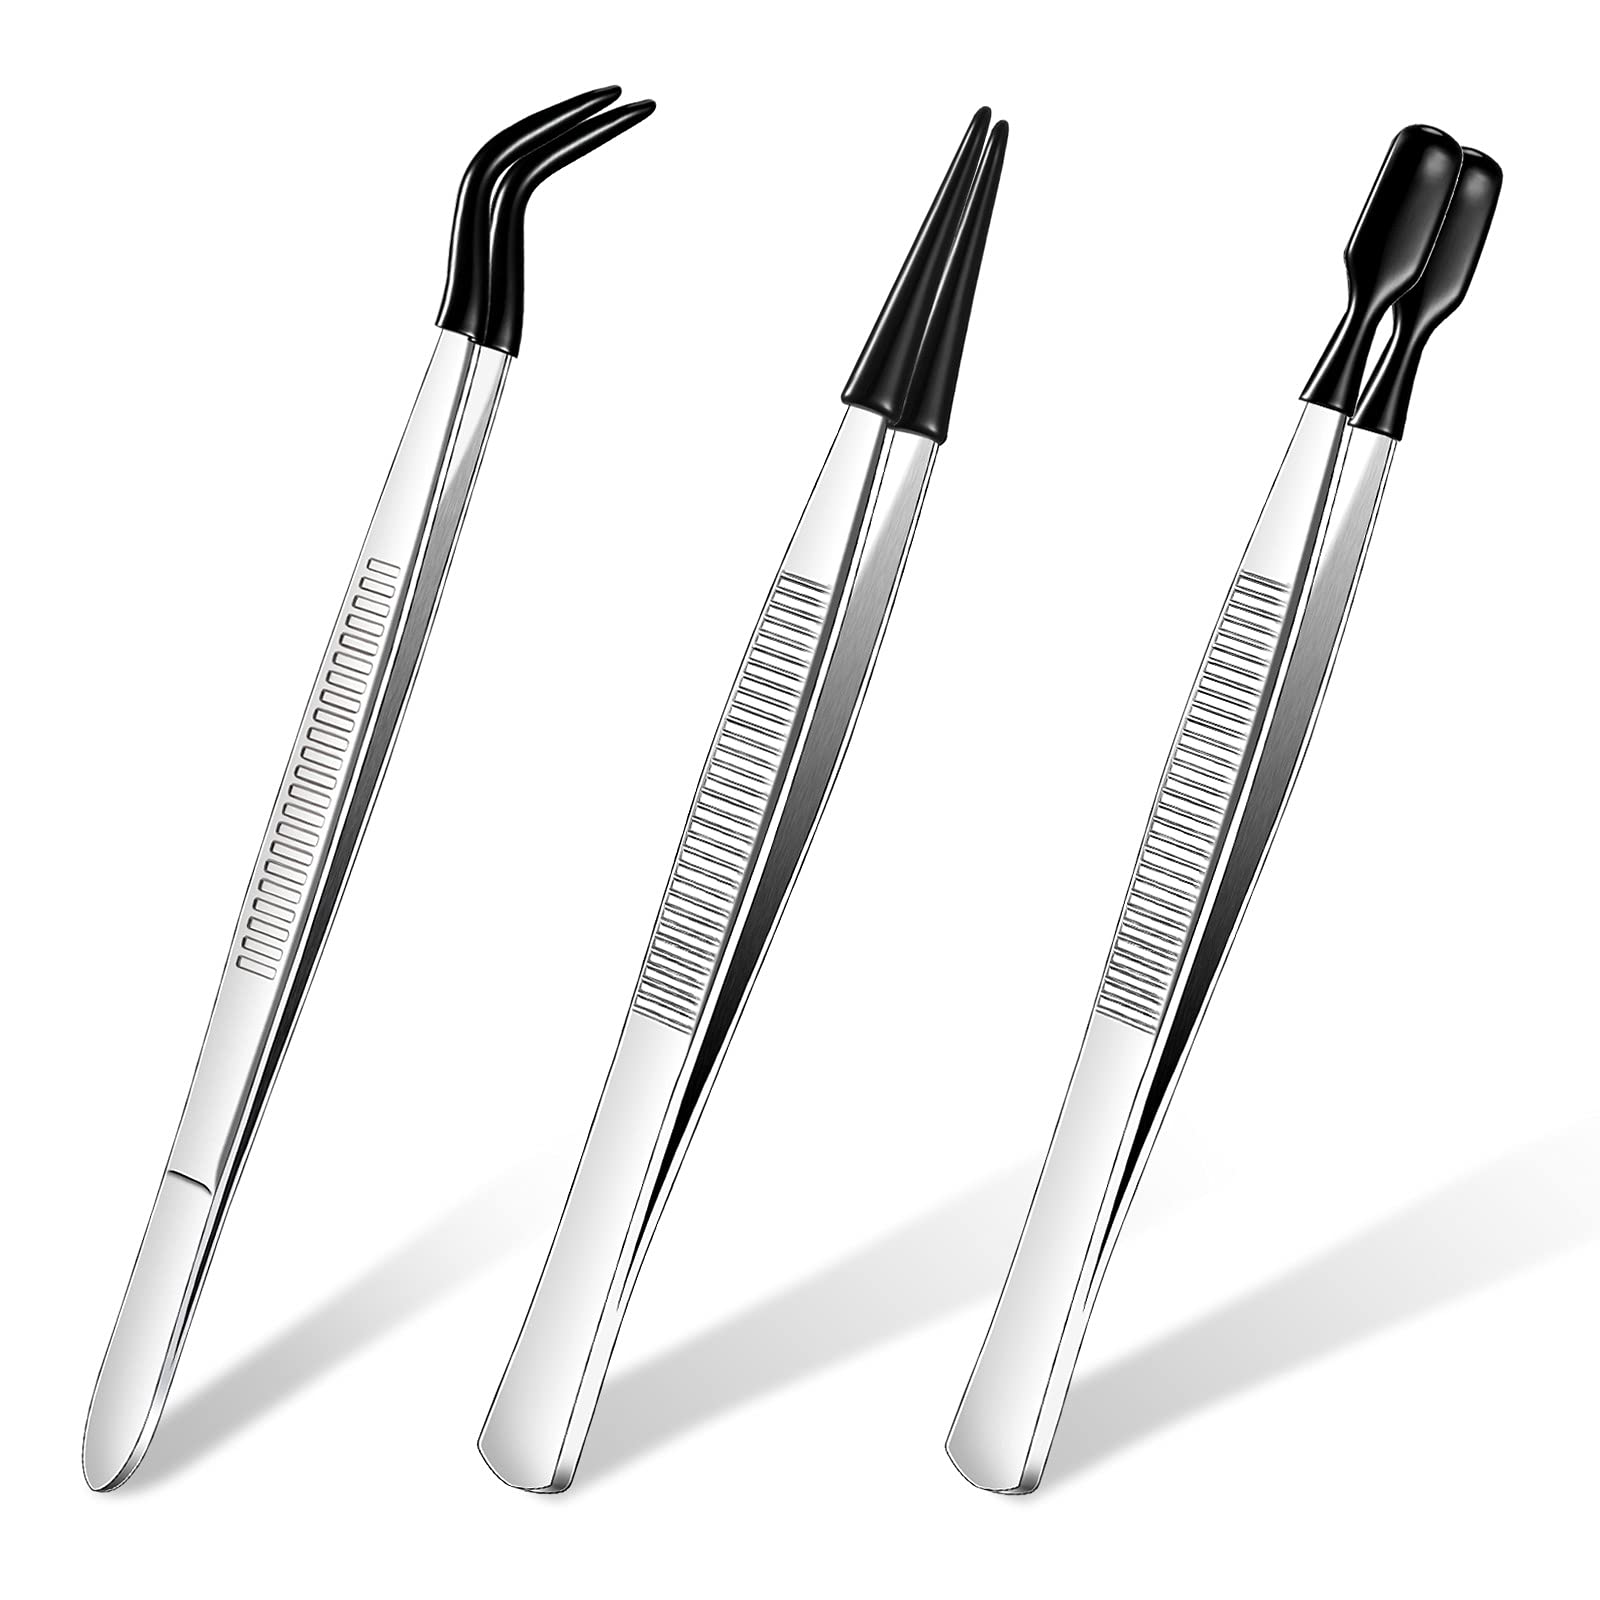 China 6 Pieces Rubber Tipped Tweezers PVC Stainless Steel Tips Tweezers for Jewelry Hobby Industrial Hobby Craft (Black)